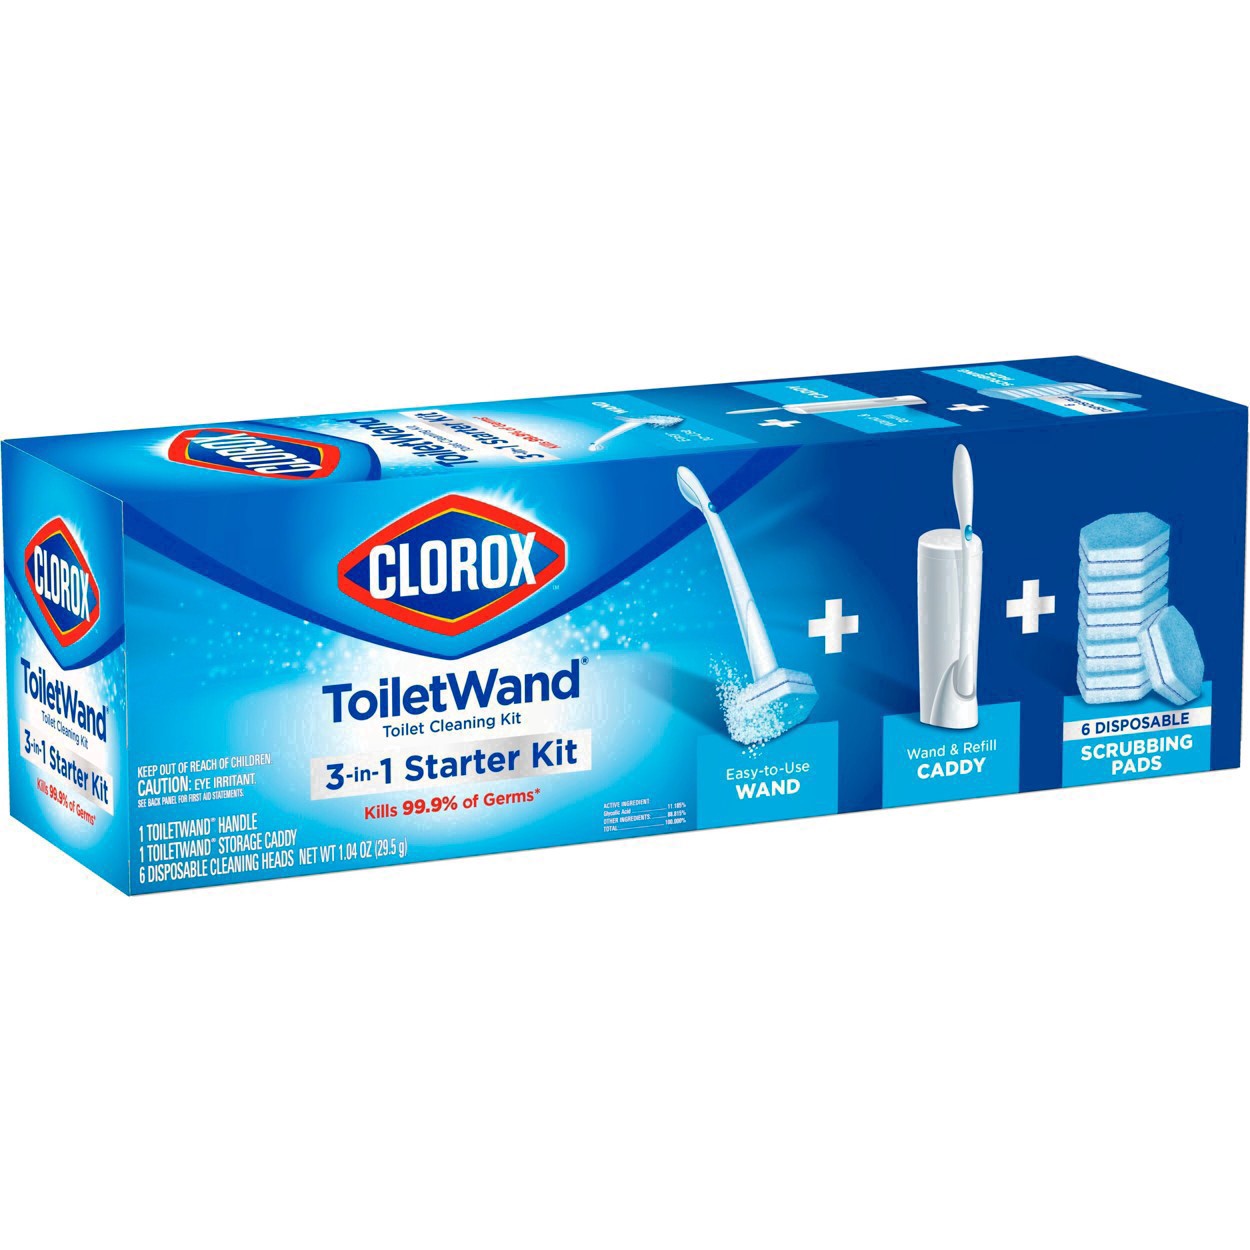 slide 64 of 176, Clorox Toilet Wand 3-in-1 Starter Toliet Cleaning Kit, 1 ct